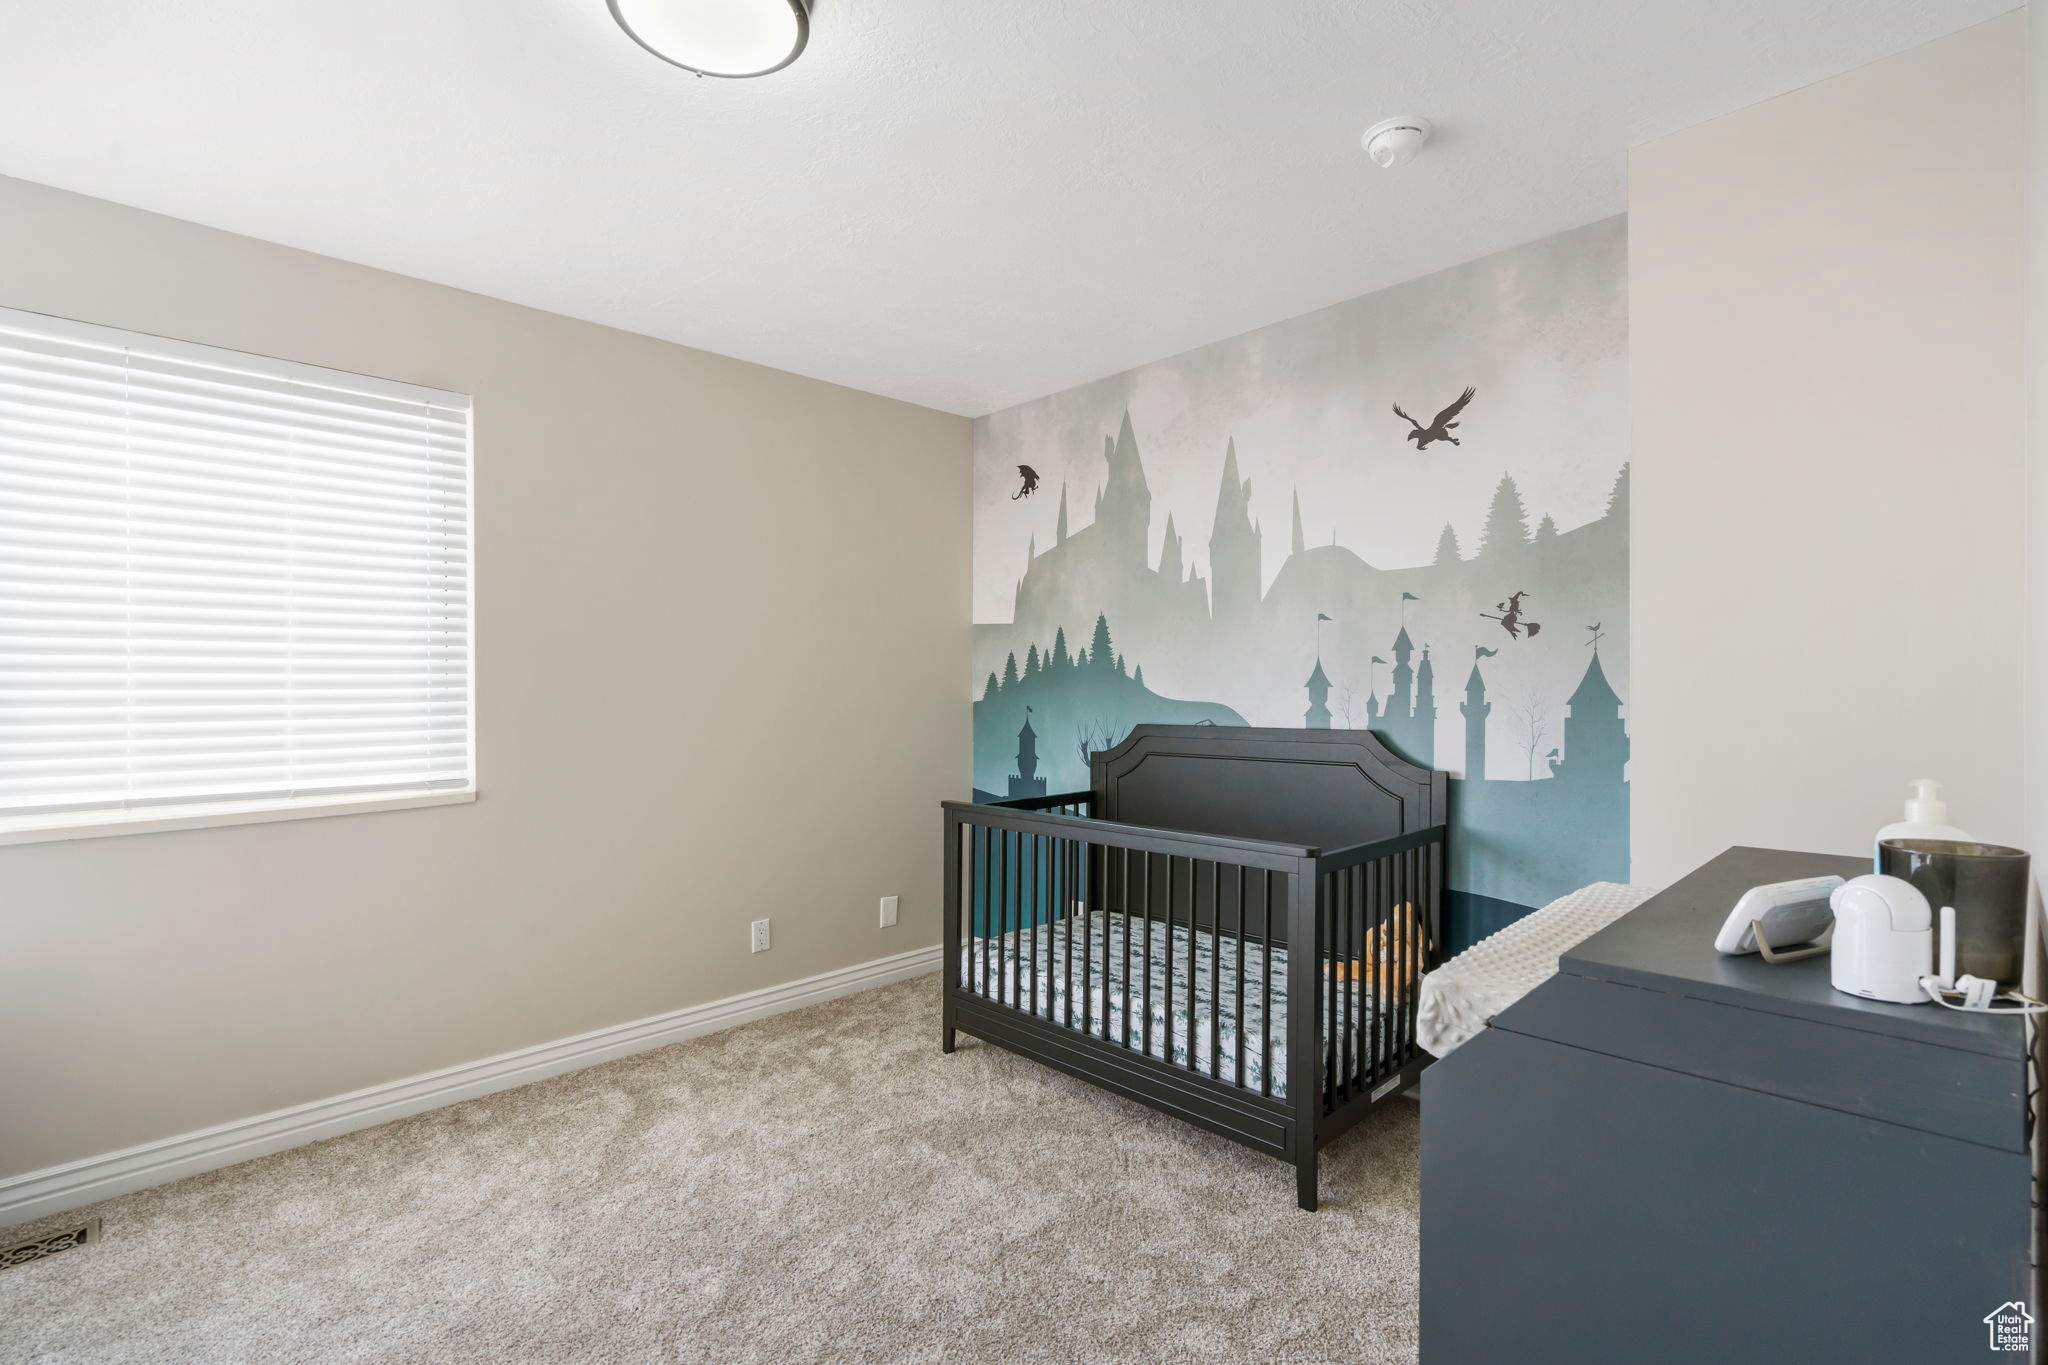 Bedroom featuring light carpet and a crib